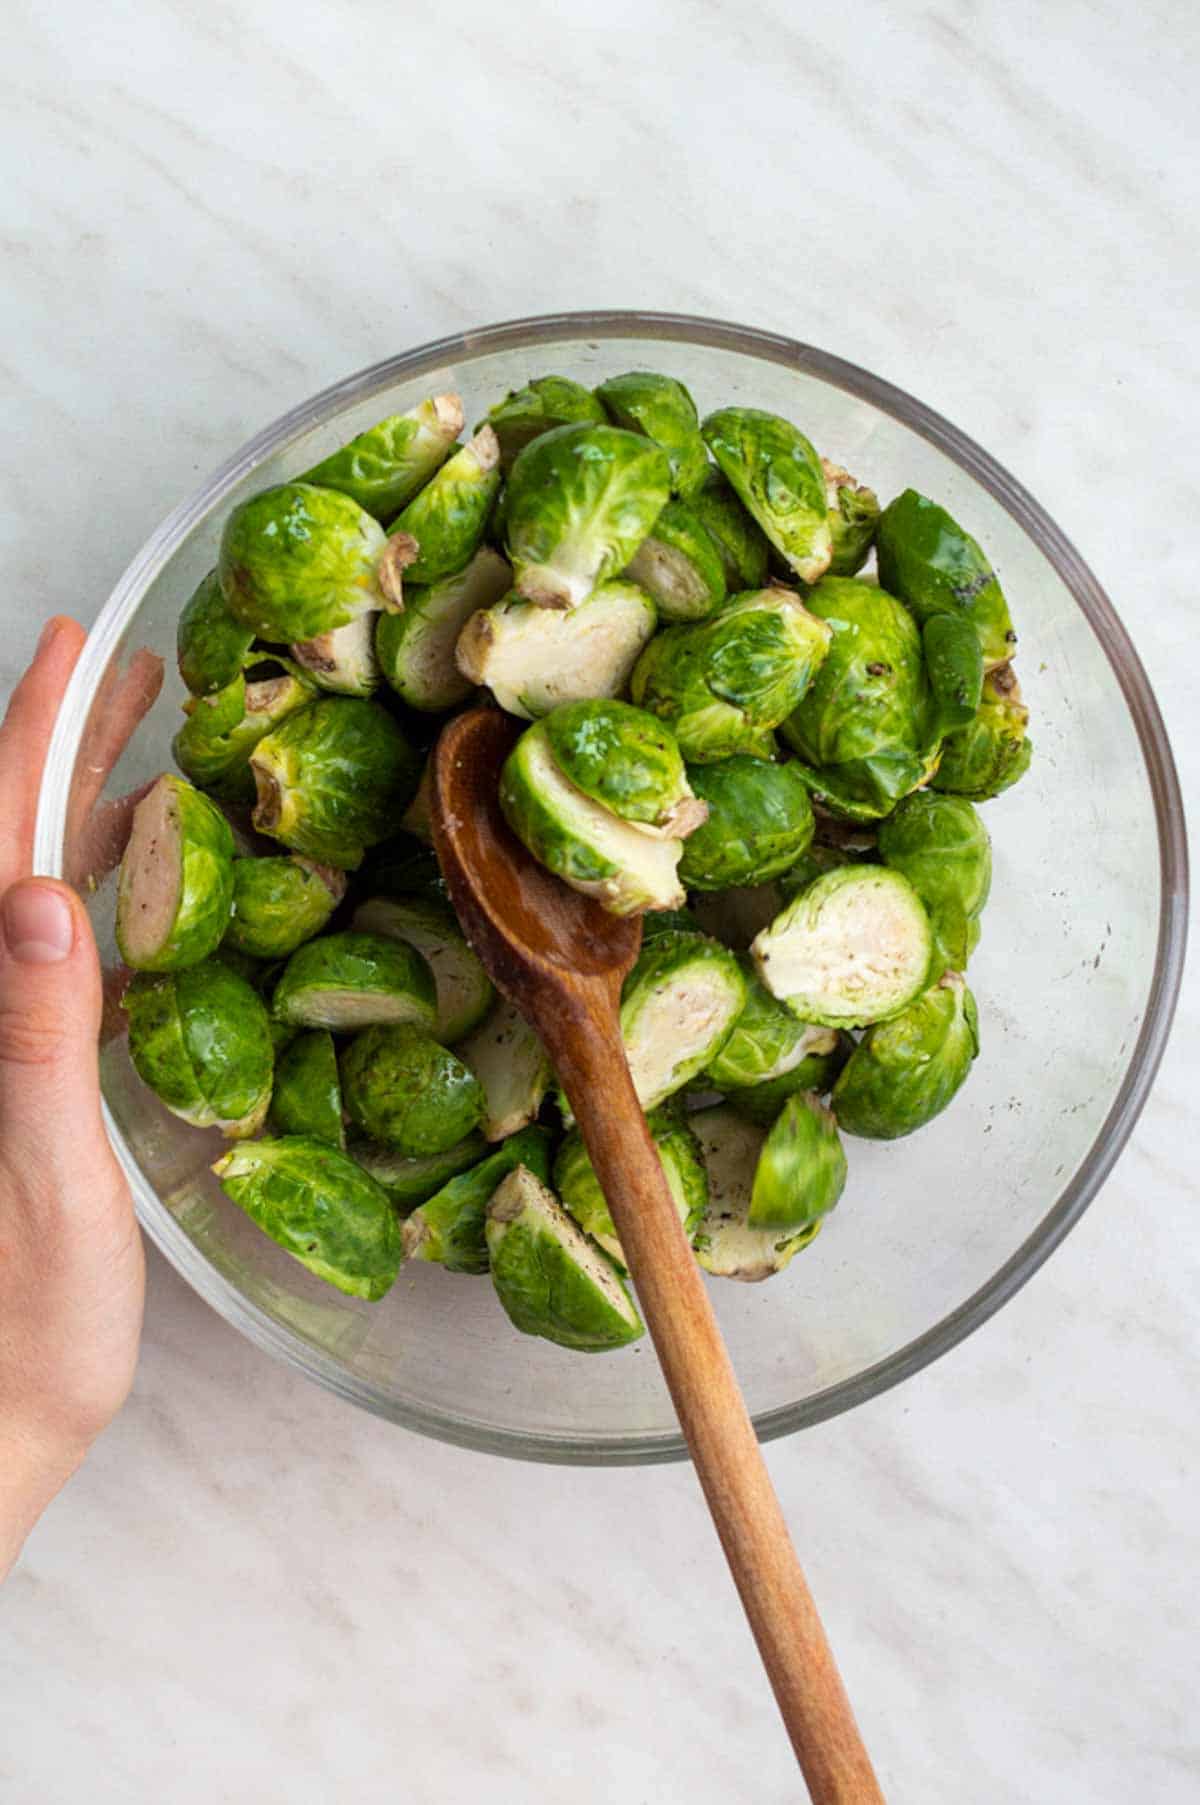 Tossing halved frozen Brussels sprouts with oil and spices in a mixing bowl.